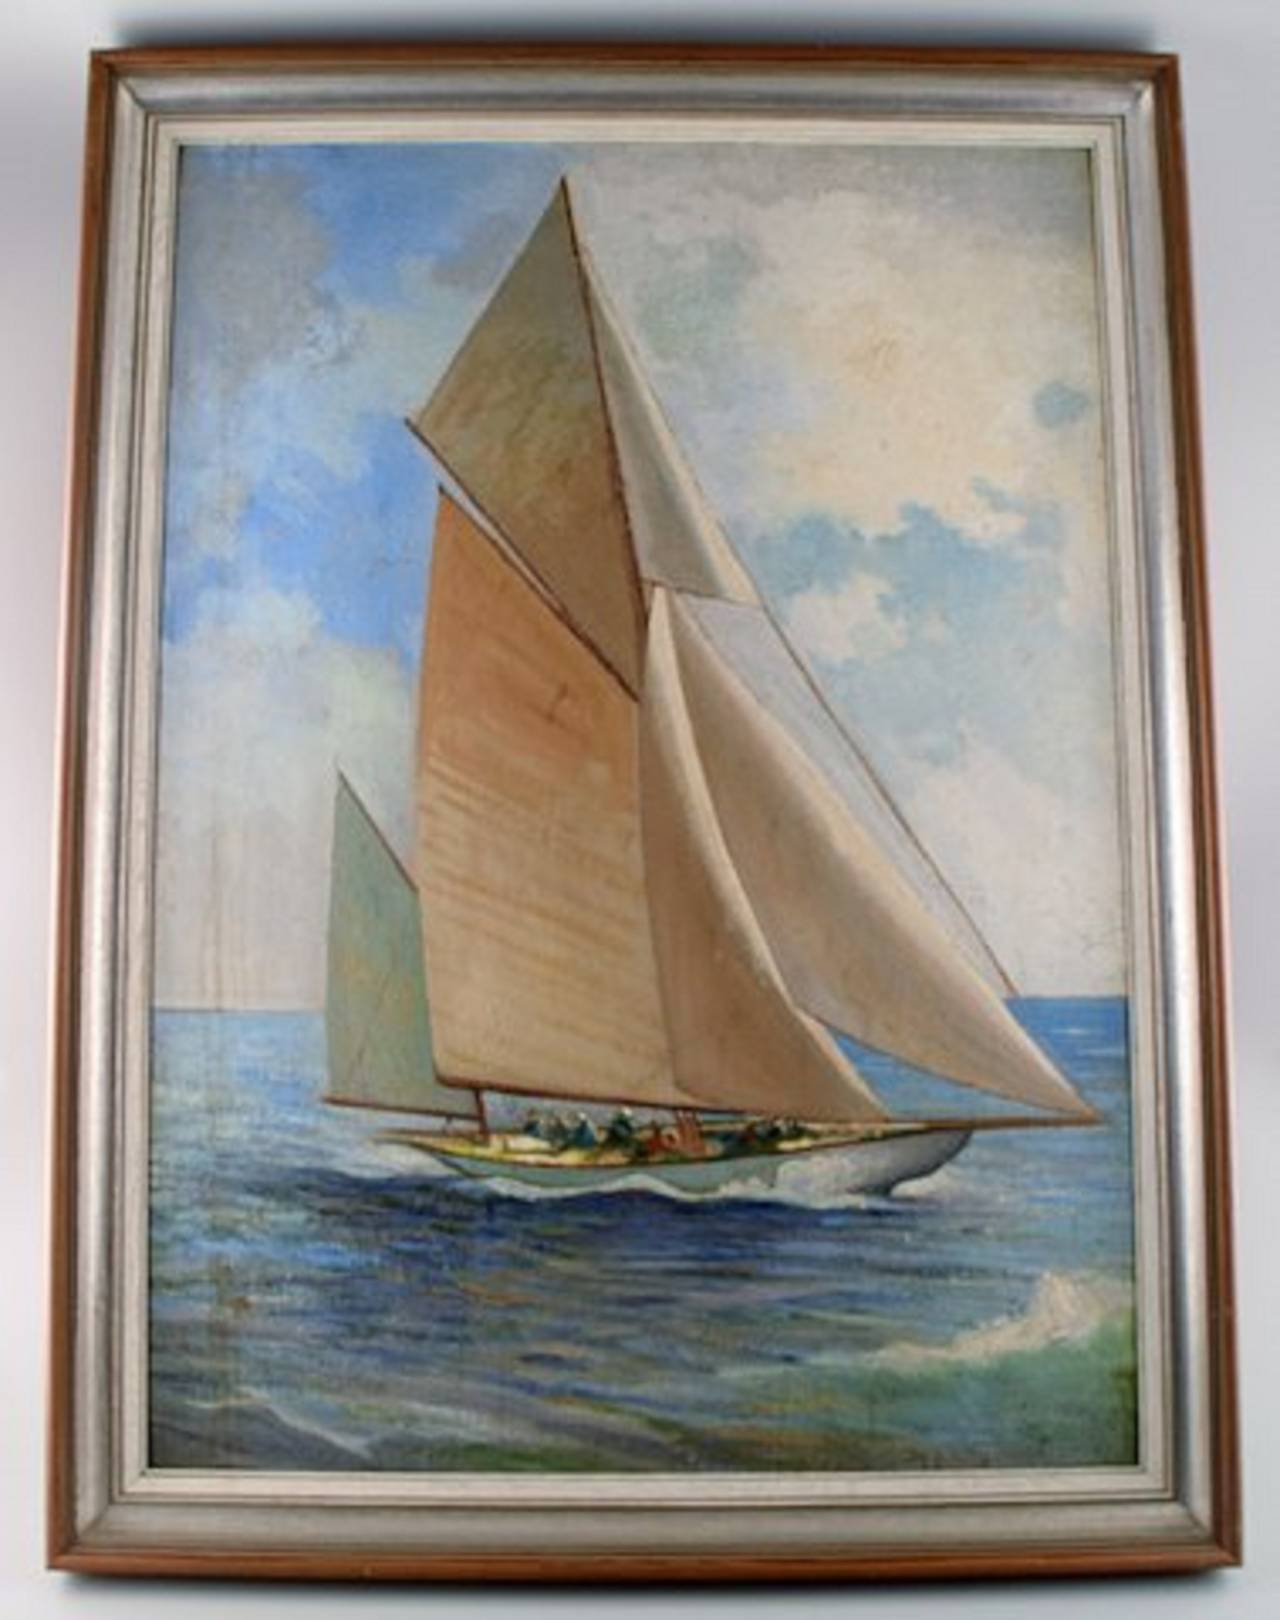 Unknown artist, mid-20th century.
Sailing ship with white sails.
Oil on board.
In very good condition.
Unsigned.
Measures: 55 x 77 cm. The frame measures 5 cm.